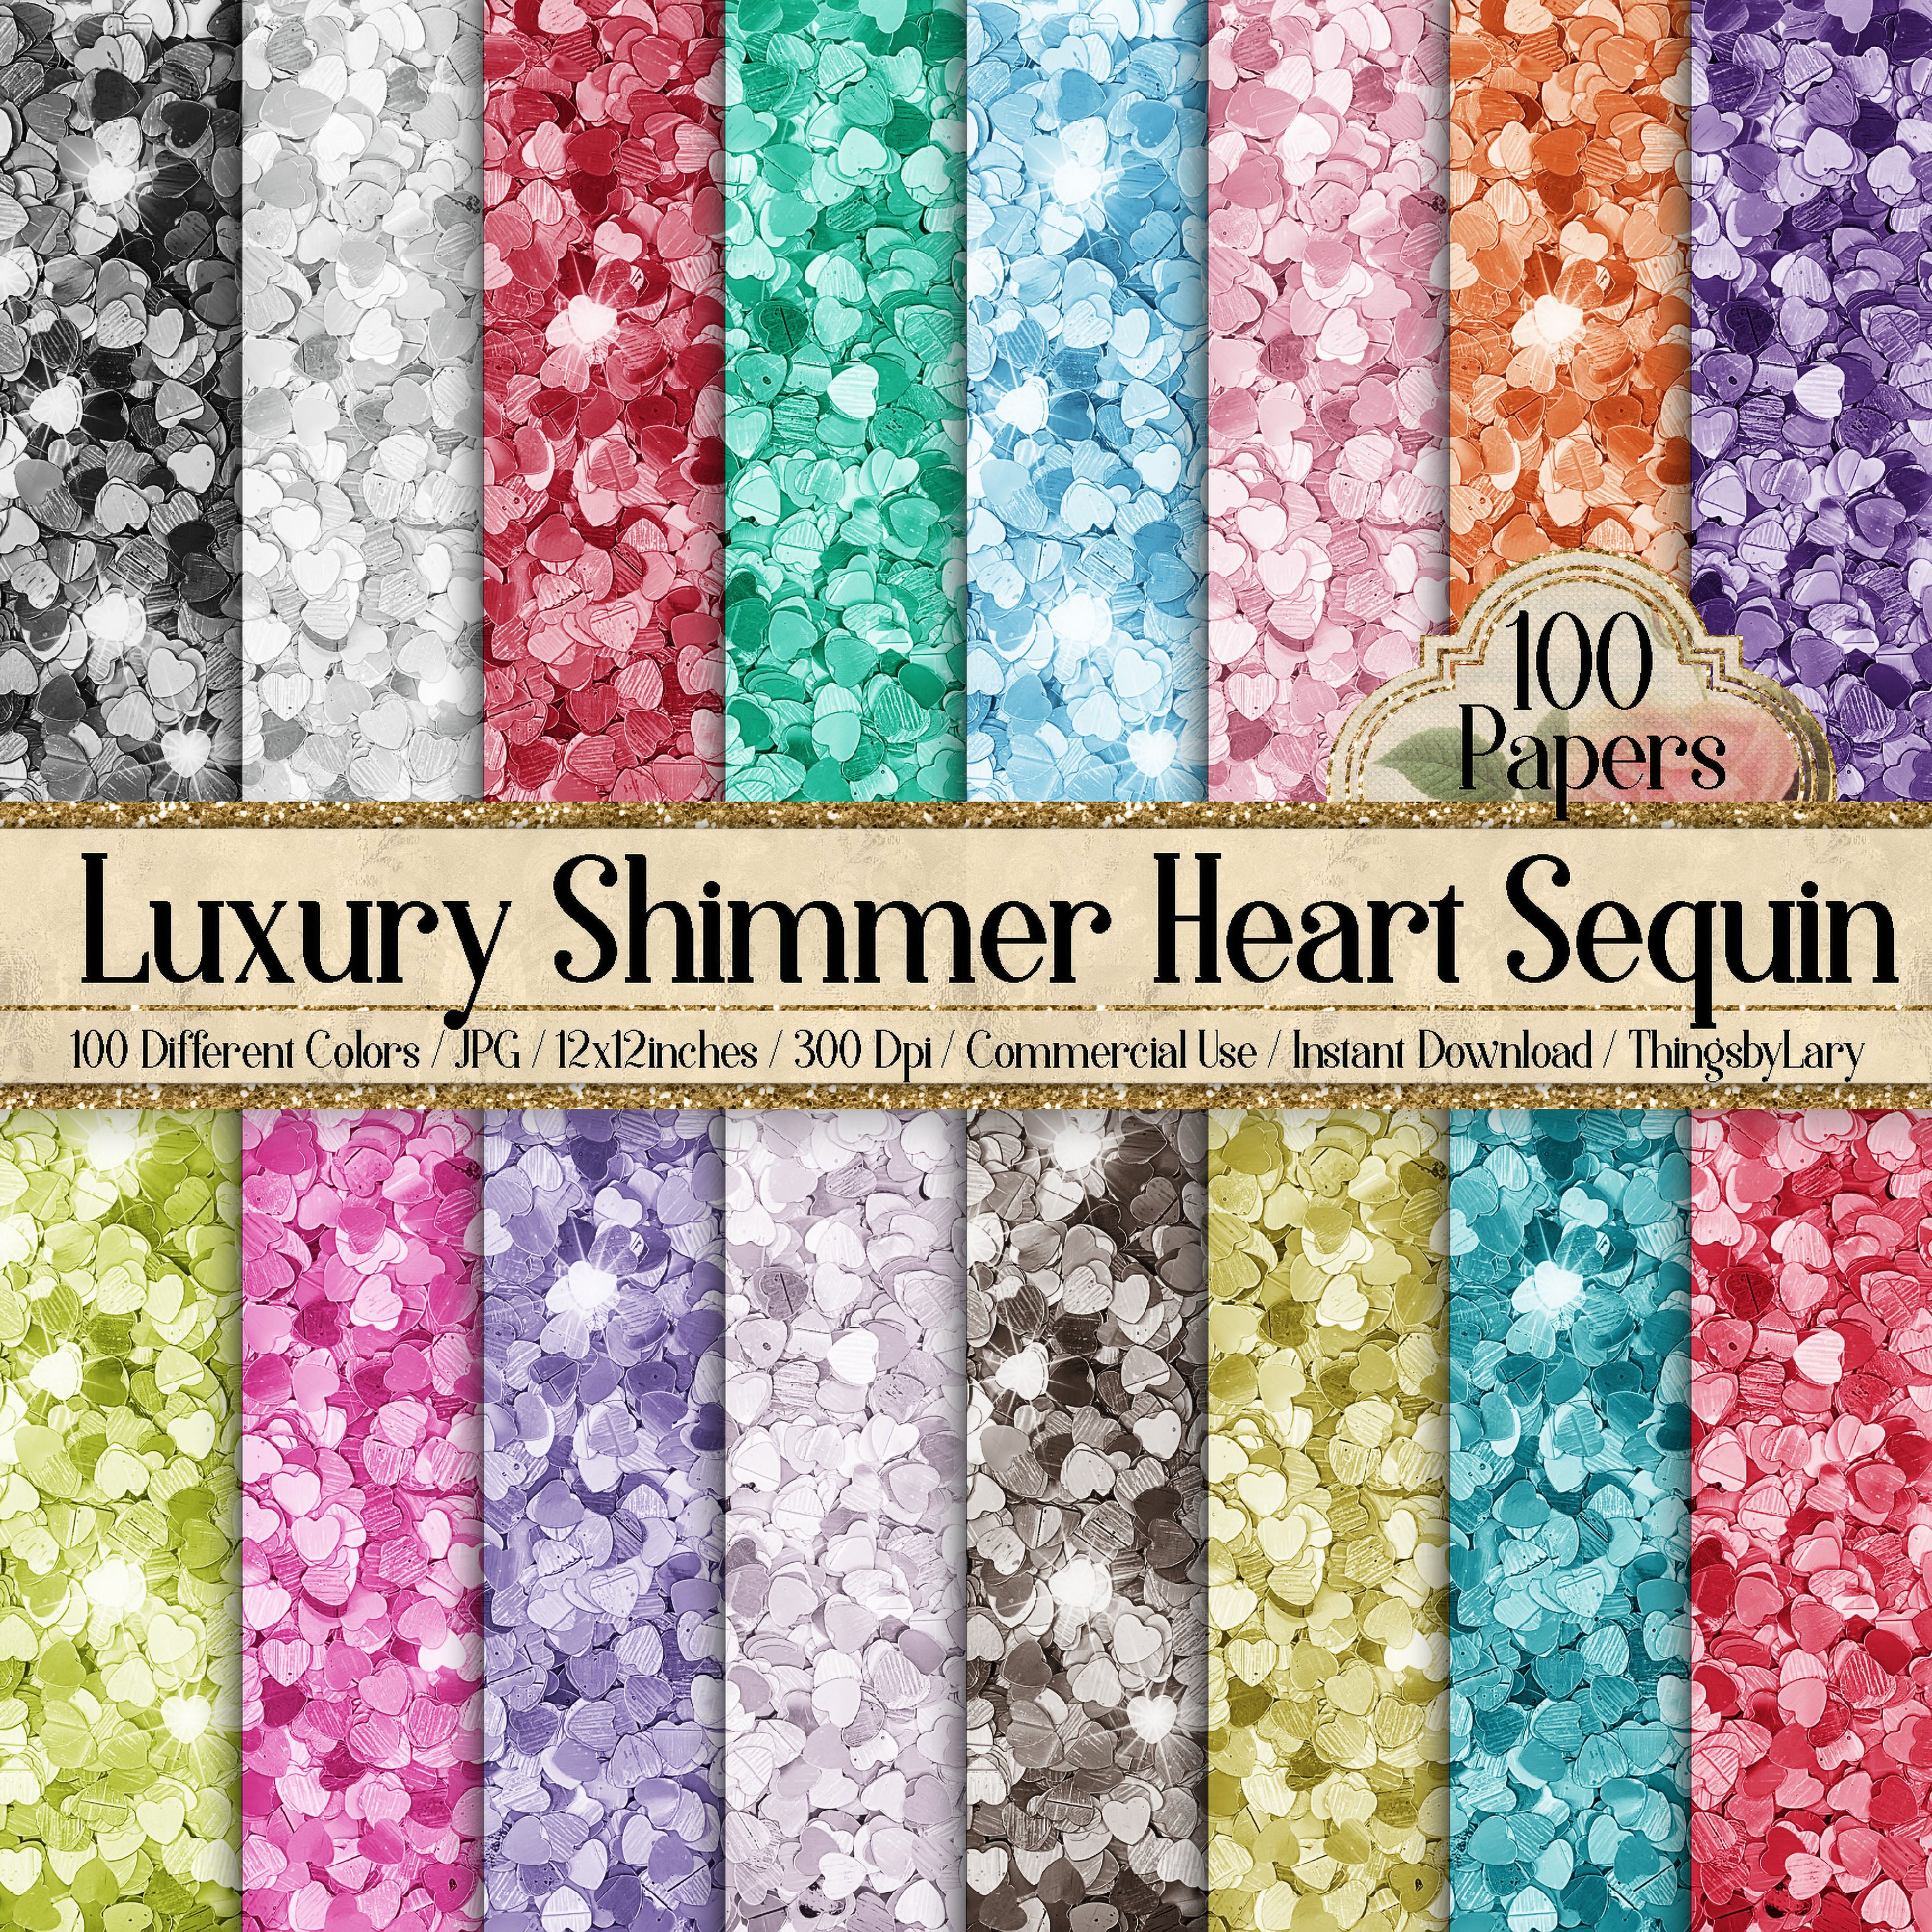 100 Luxury Shimmer Heart Sequin Digital Papers